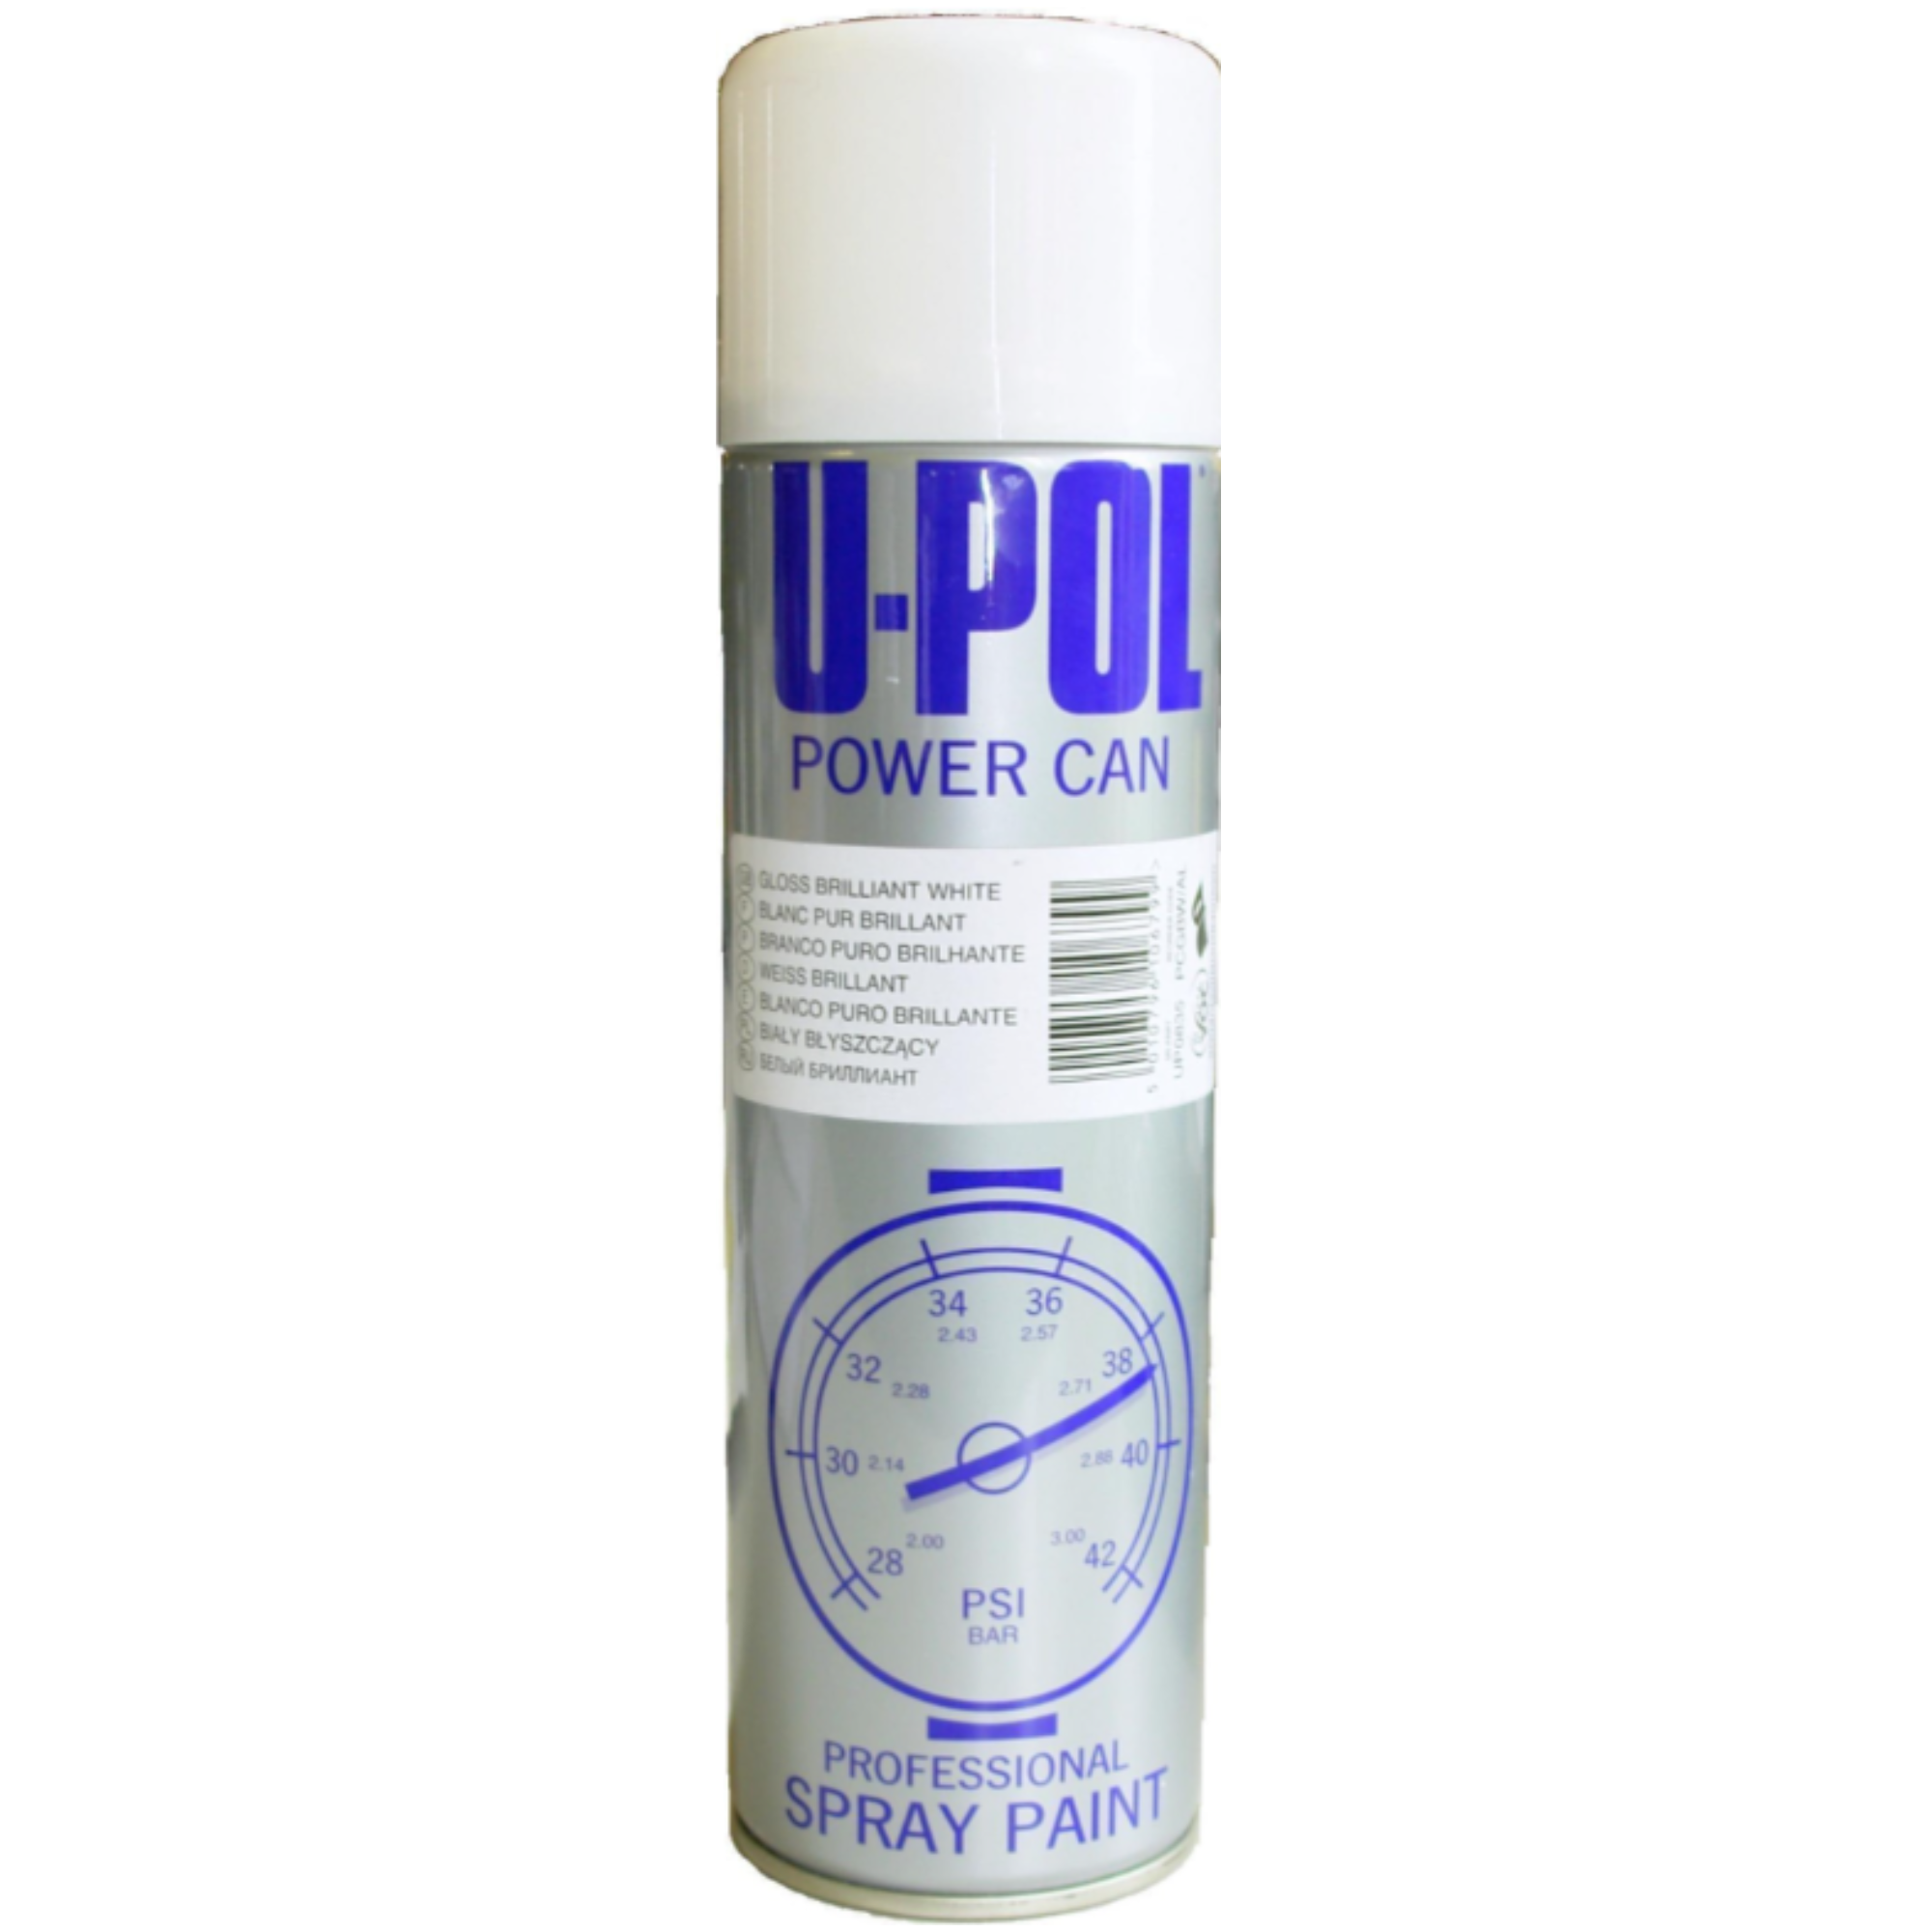 Upol Power Can Gloss White 500ml